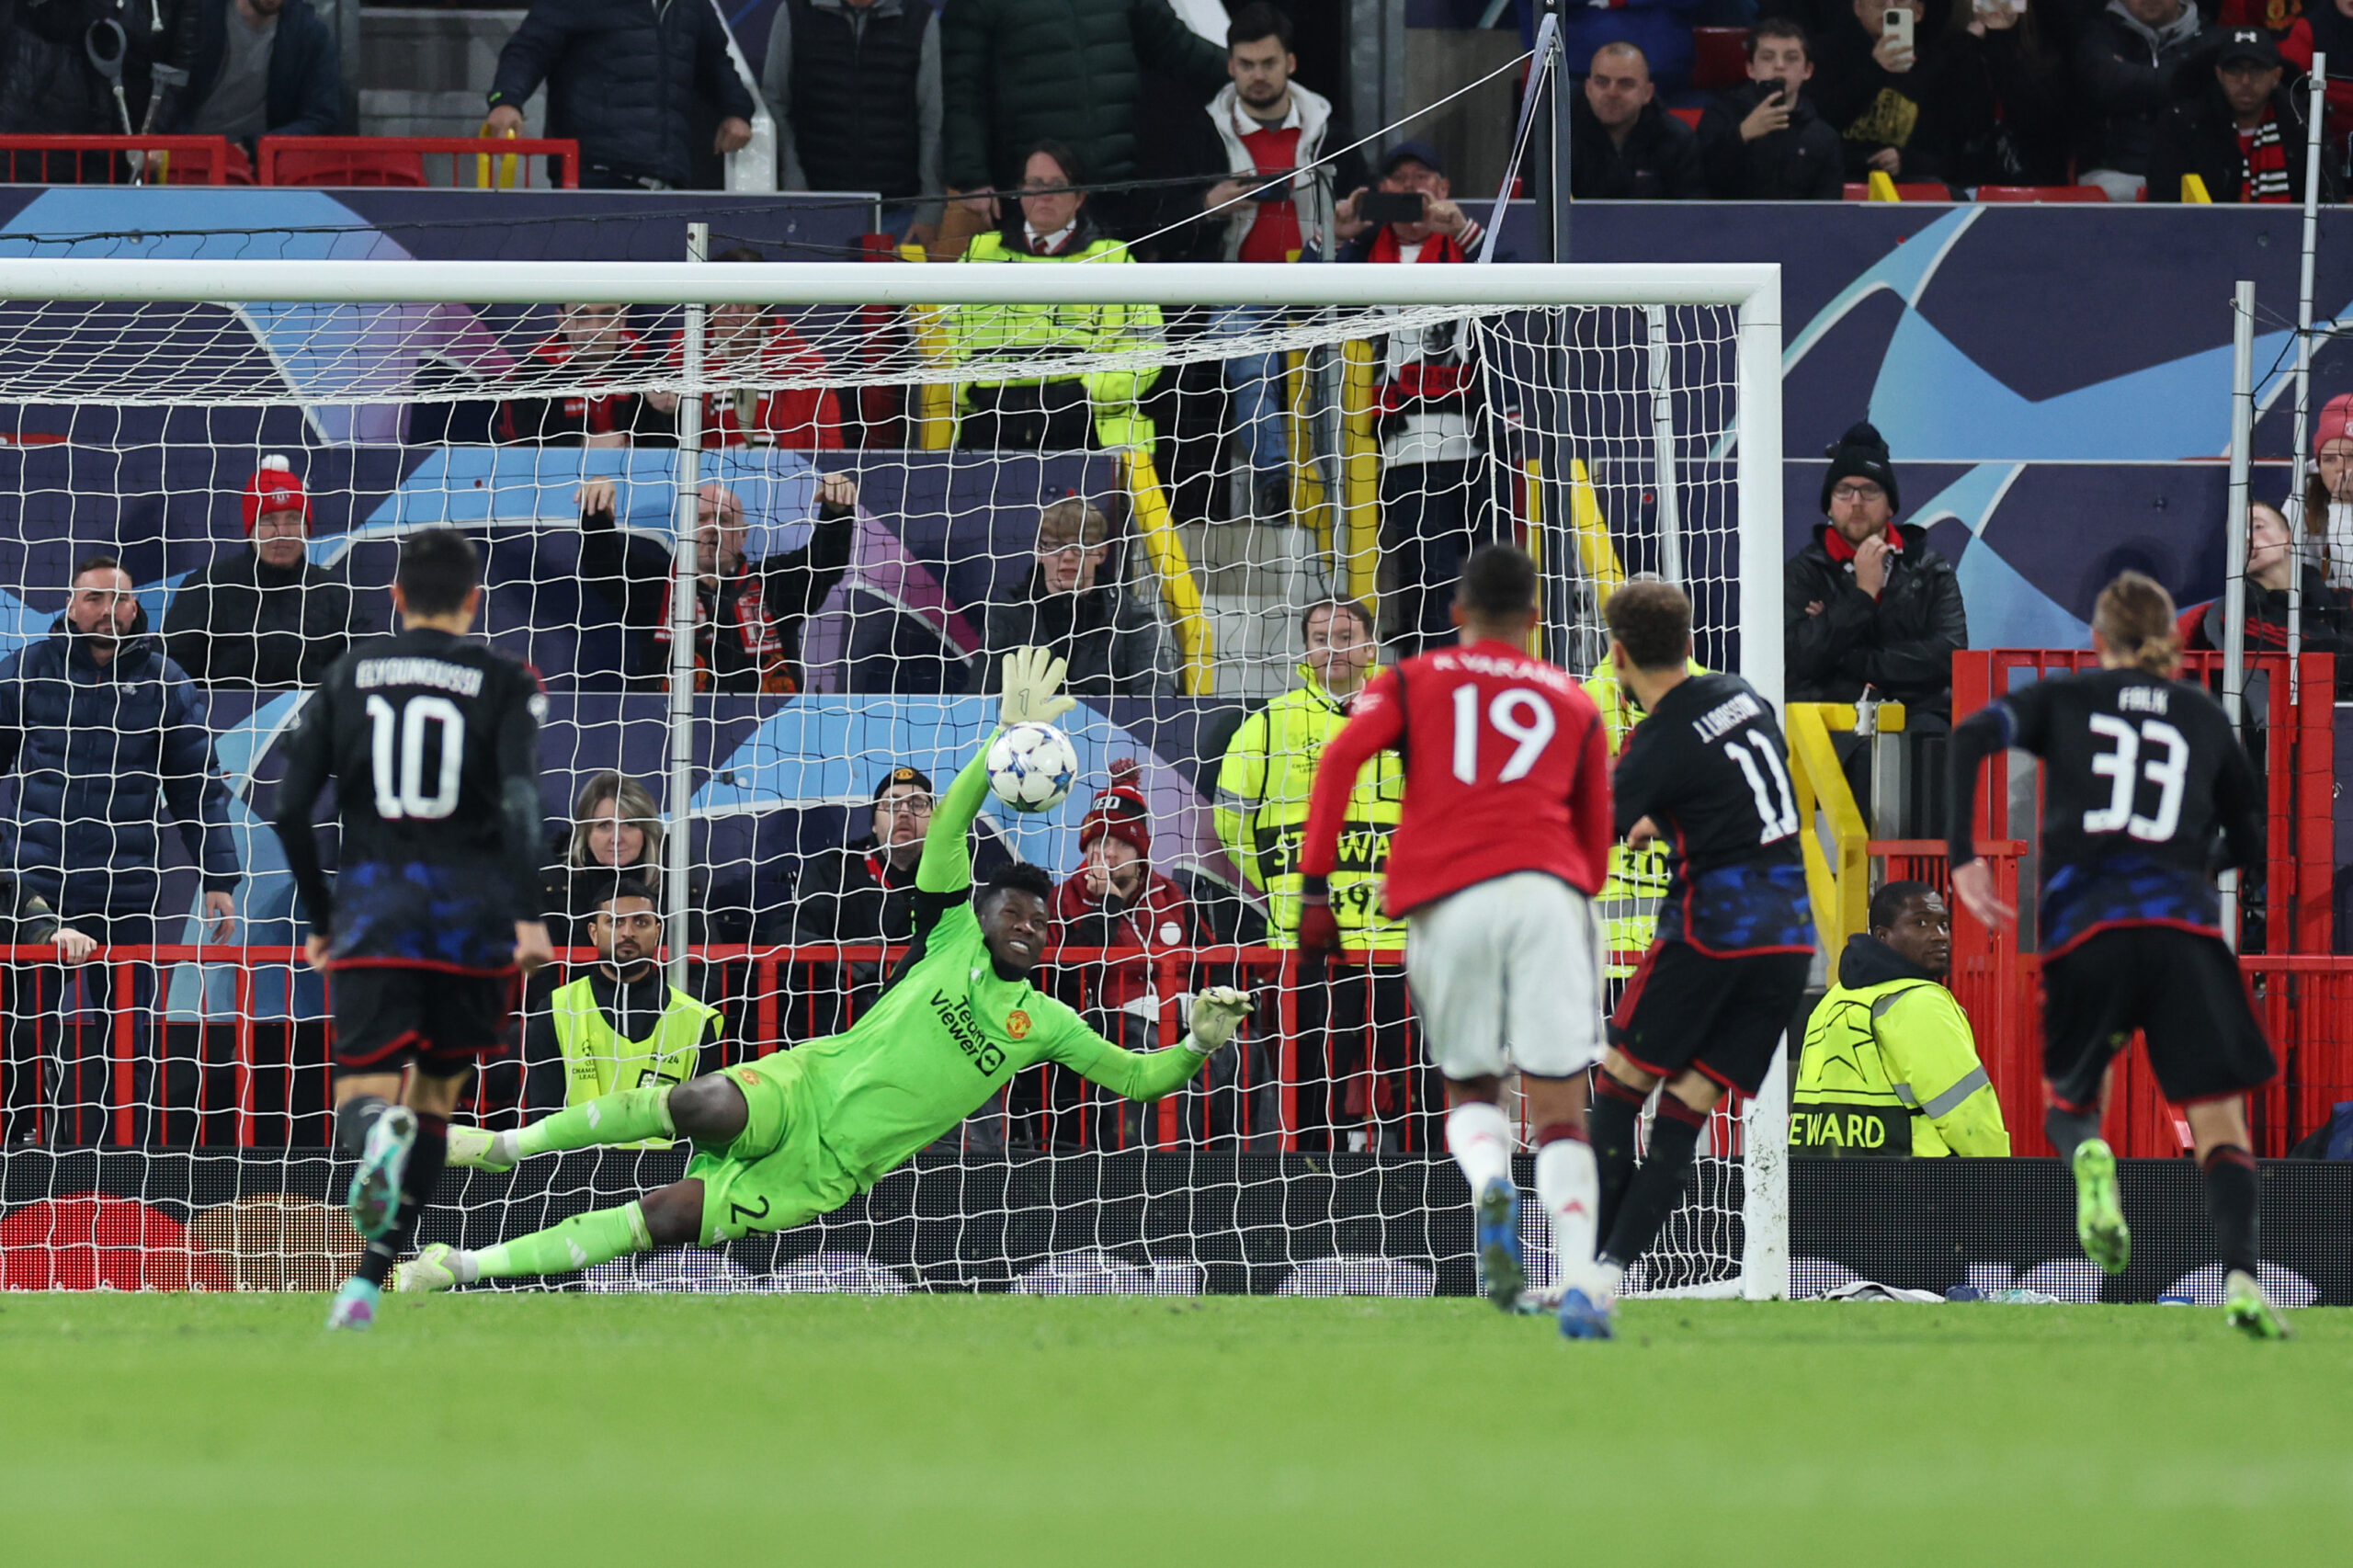 UEFA Champions League: Andre Onana’s added time penalty save gives Man Utd victory